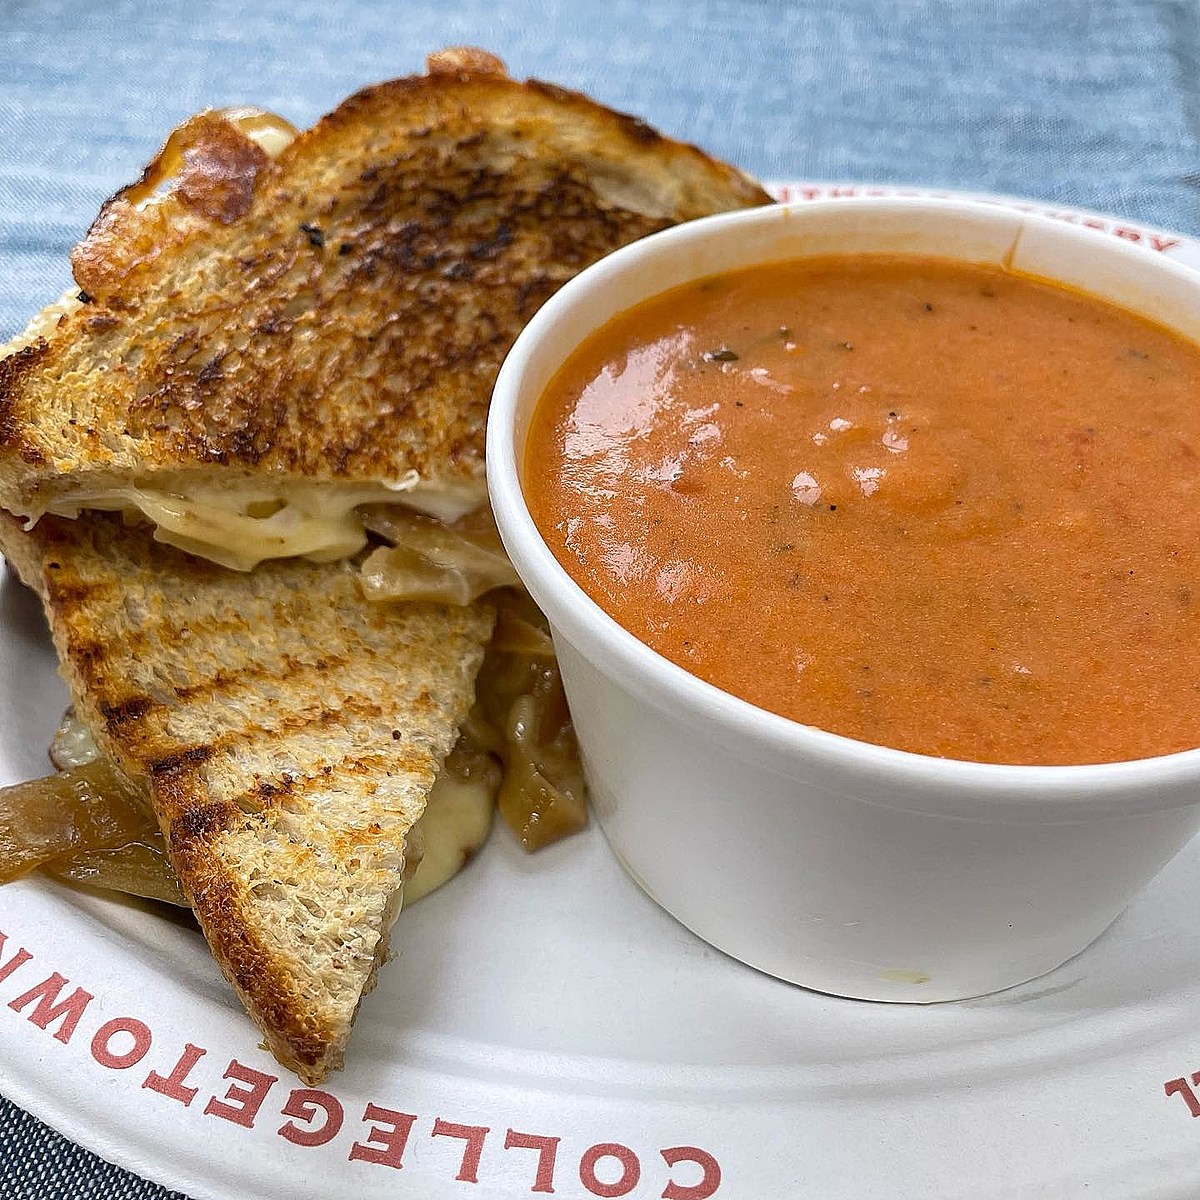 "Soup is ready!" 13 Upstate Restaurants Serving Up a Great Cup o